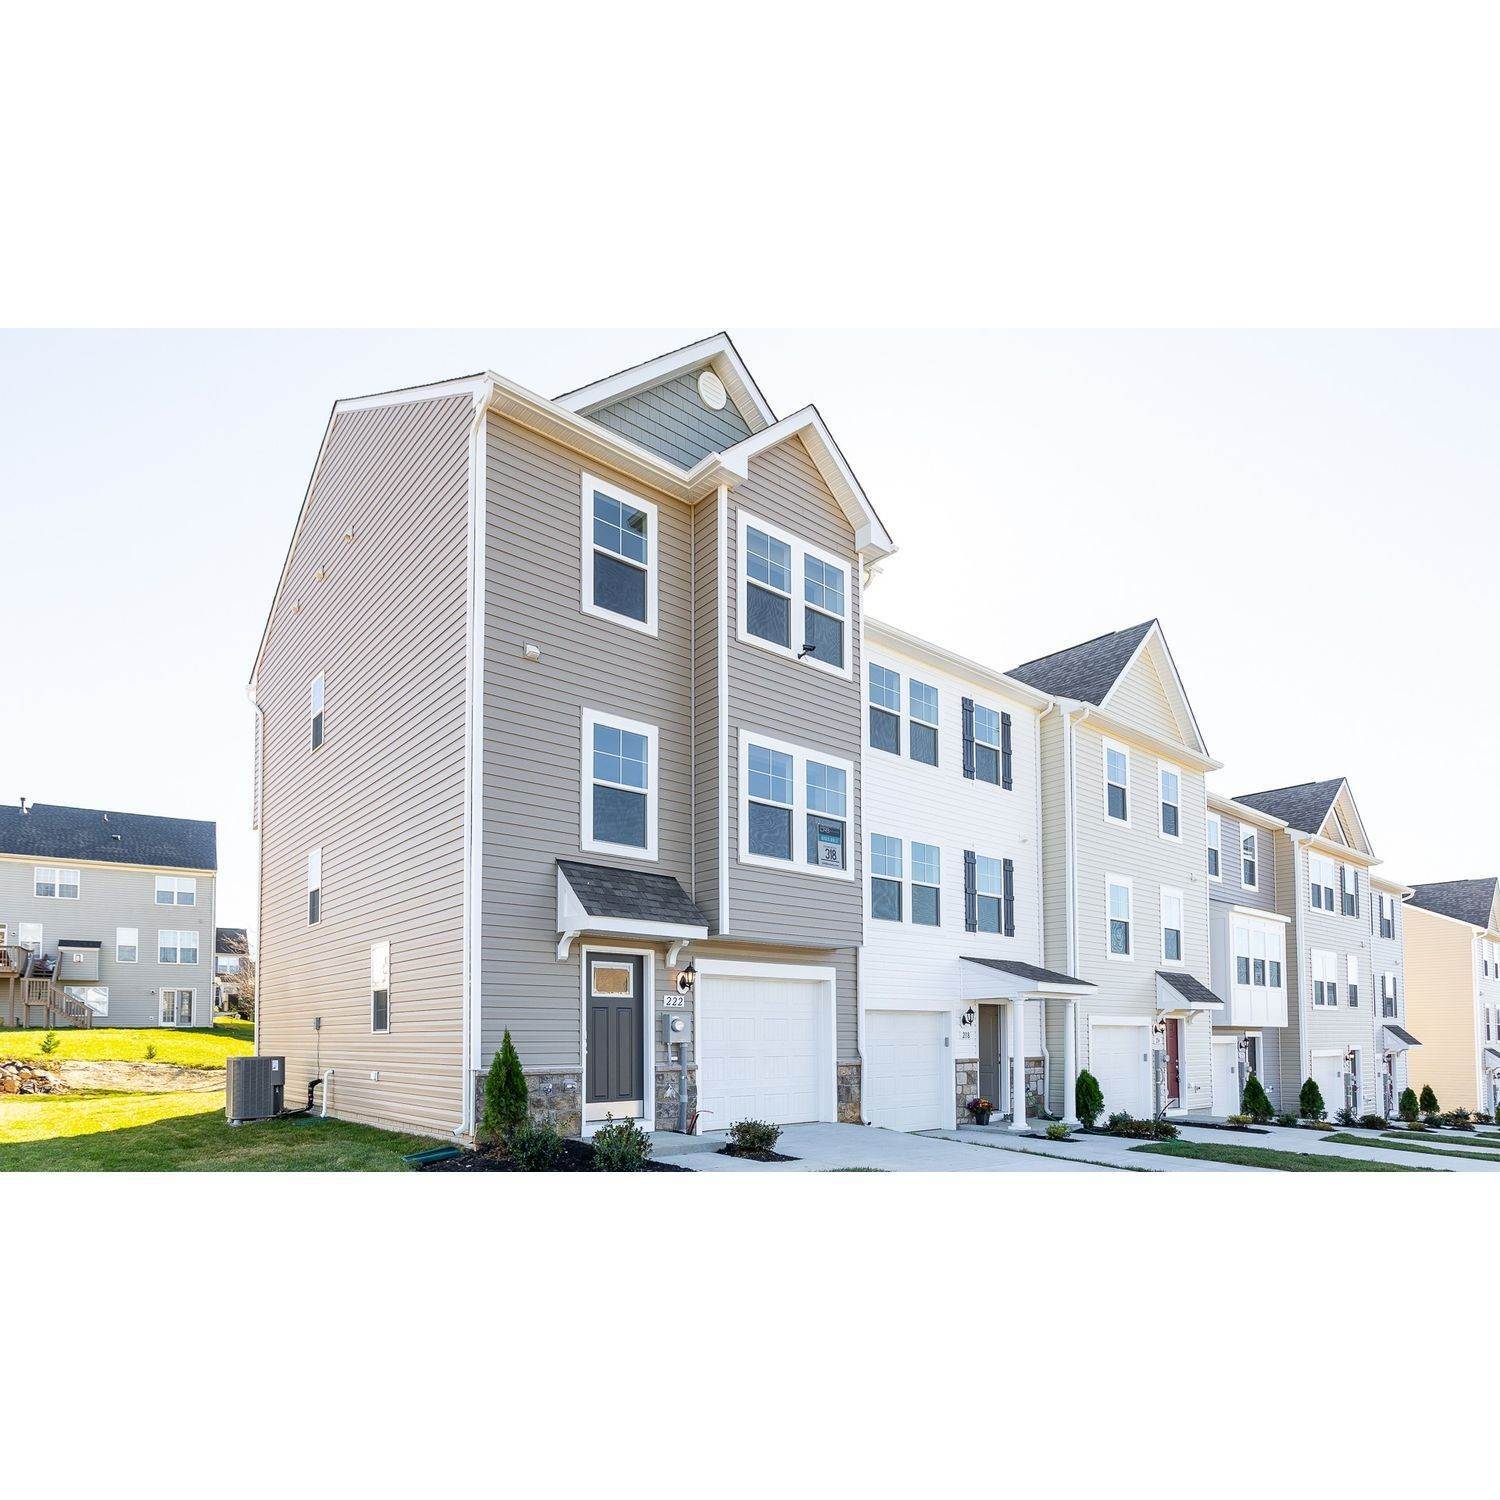 3. Archer's Rock Townhomes building at 46 Capshaw Road, Martinsburg, WV 25403